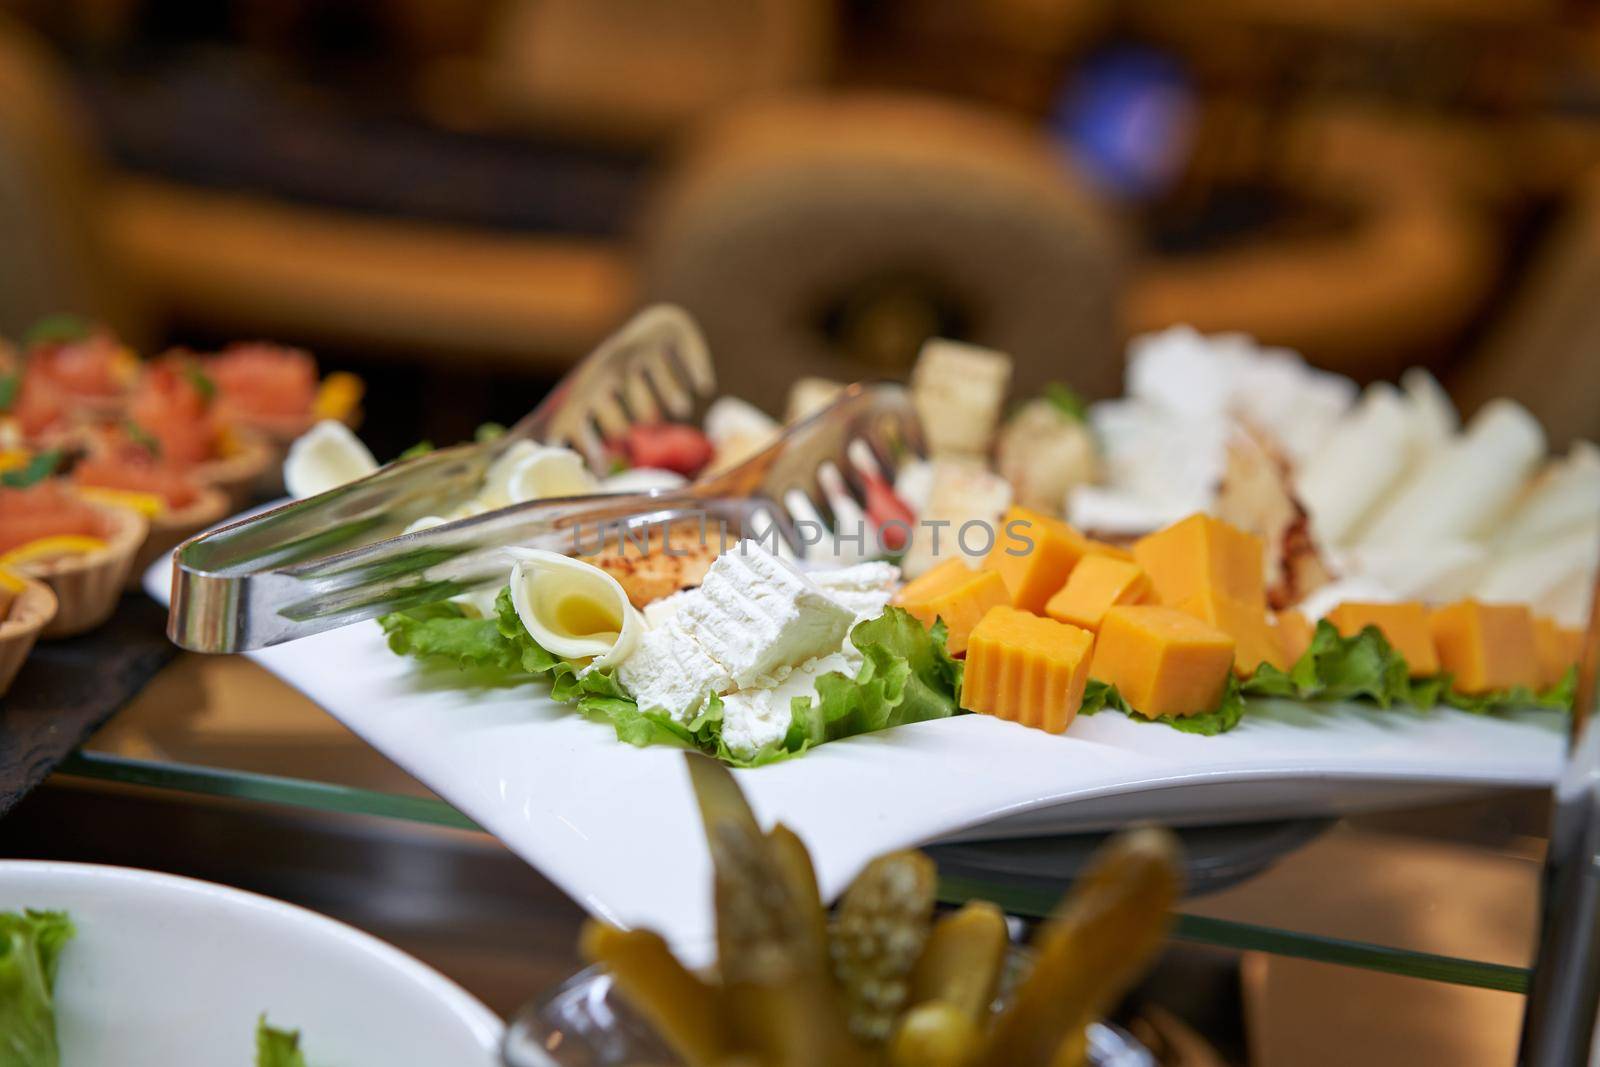 Plate with cheese and salad Different types of cheese different colors by Praximon